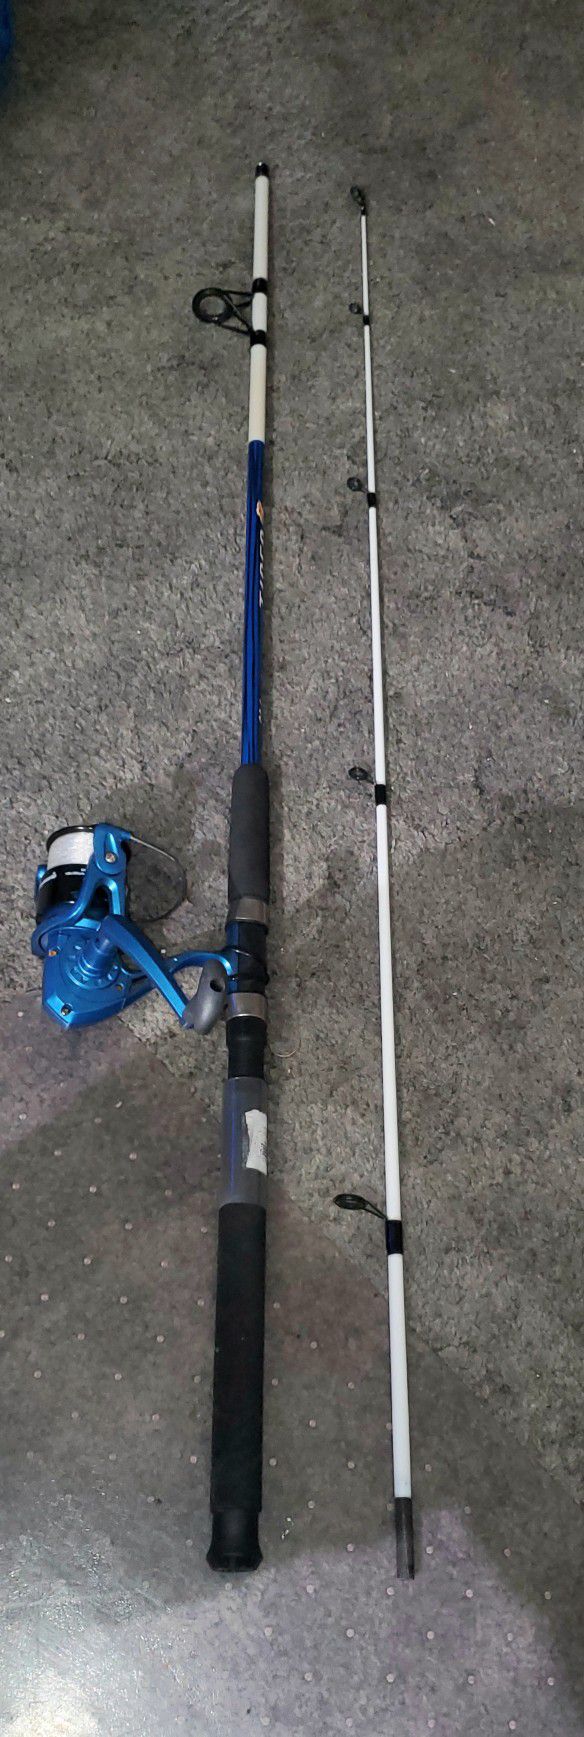 Shakespeare Tiger Spinning Reel On 7ft Shakespeare Tiger Rod for Sale in  Plant City, FL - OfferUp